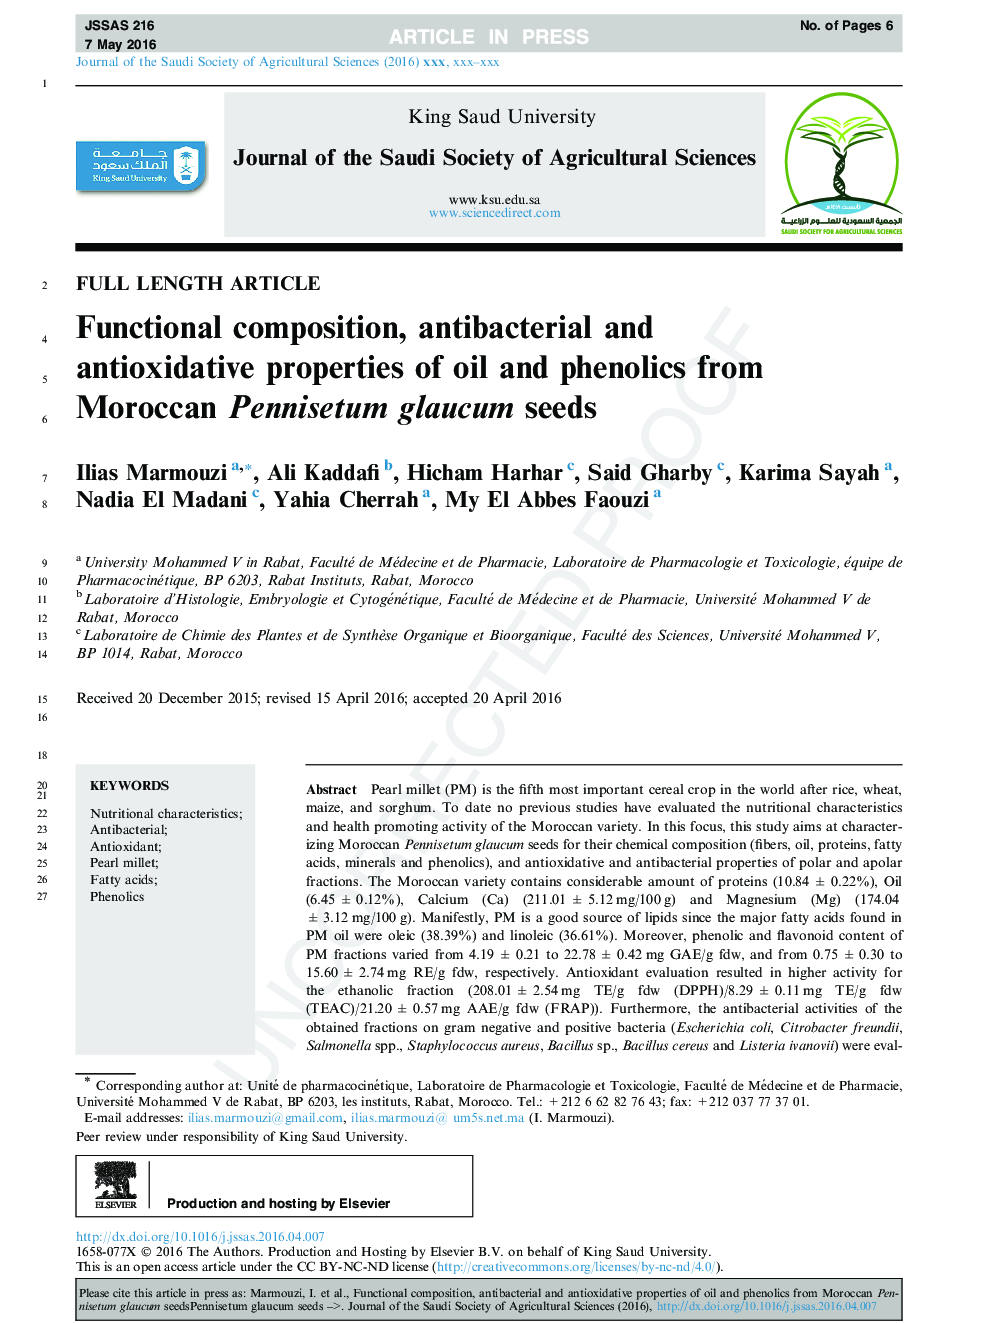 Functional composition, antibacterial and antioxidative properties of oil and phenolics from Moroccan Pennisetum glaucum seeds